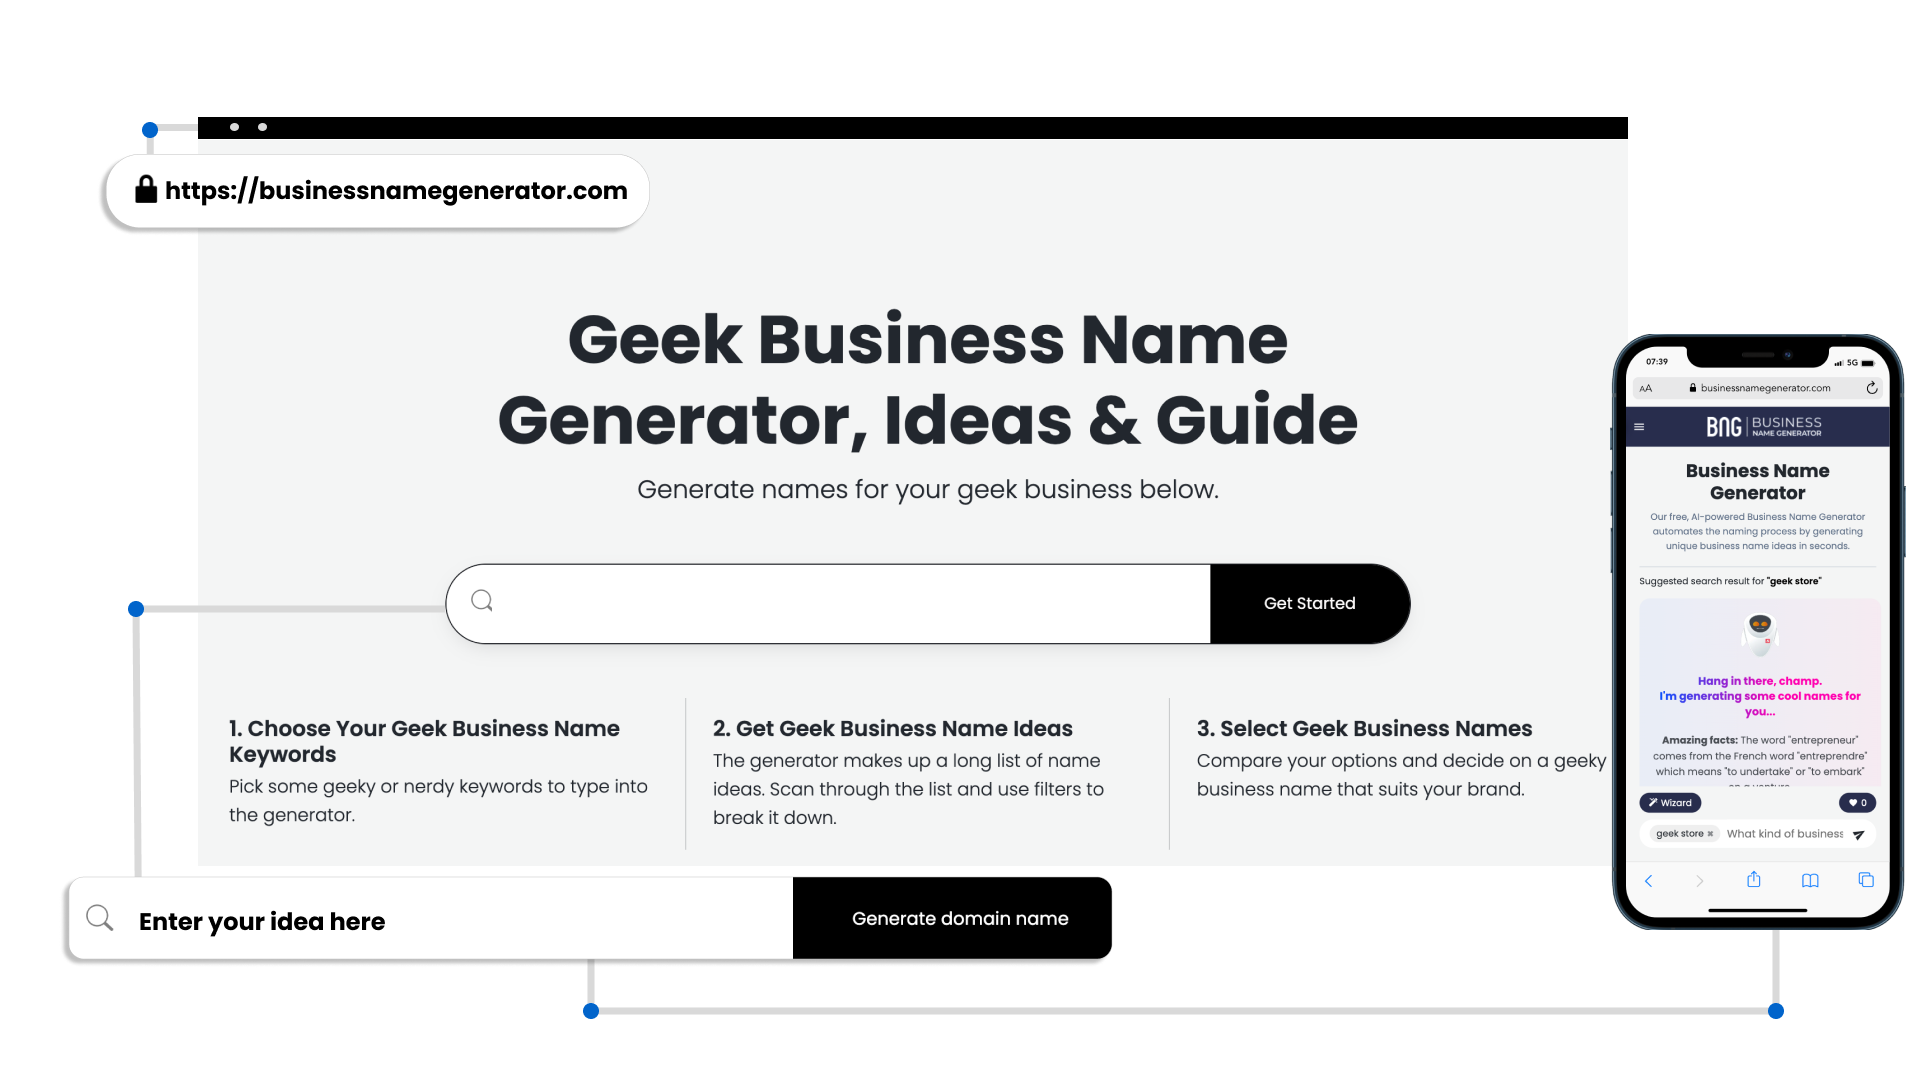 Benefits of Our Geek Business Name Generator